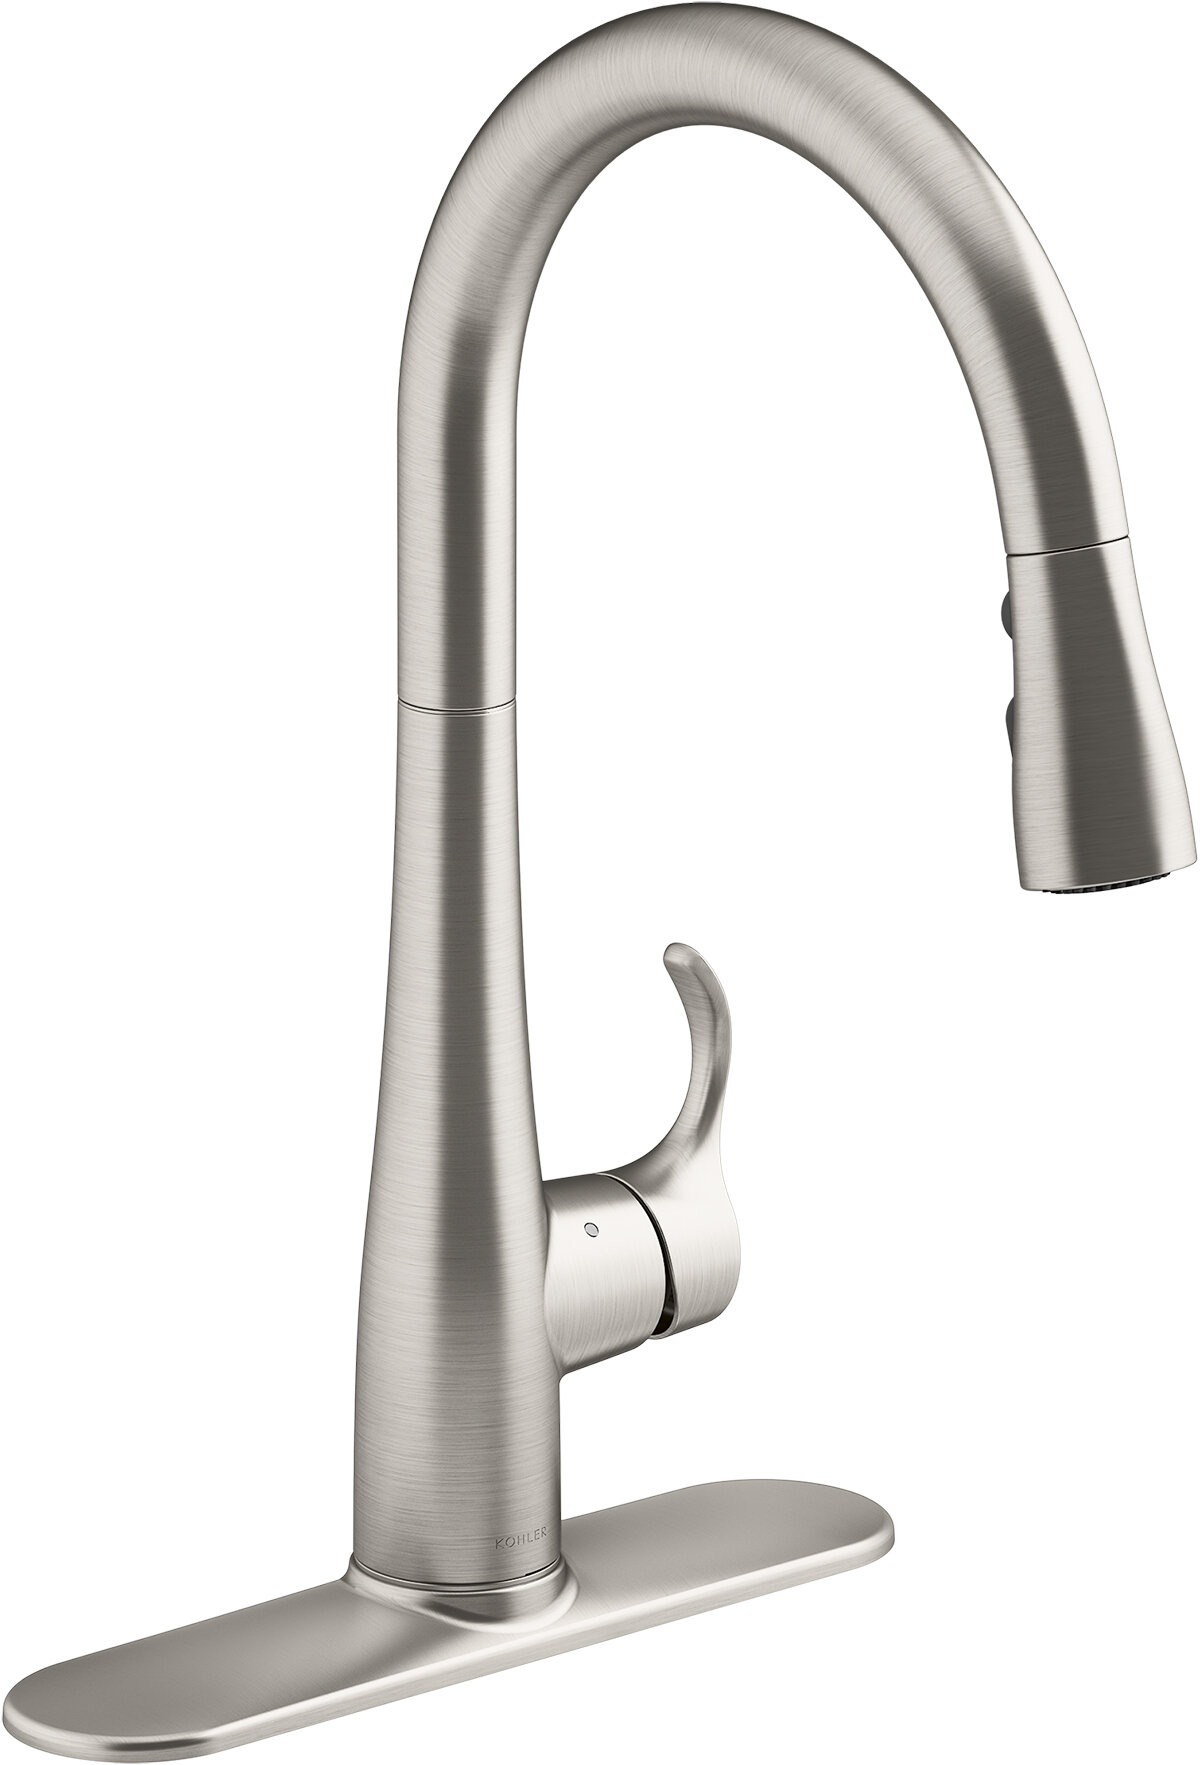 Kohler Simplice Touchless Pull Down Kitchen Sink Faucet Reviews